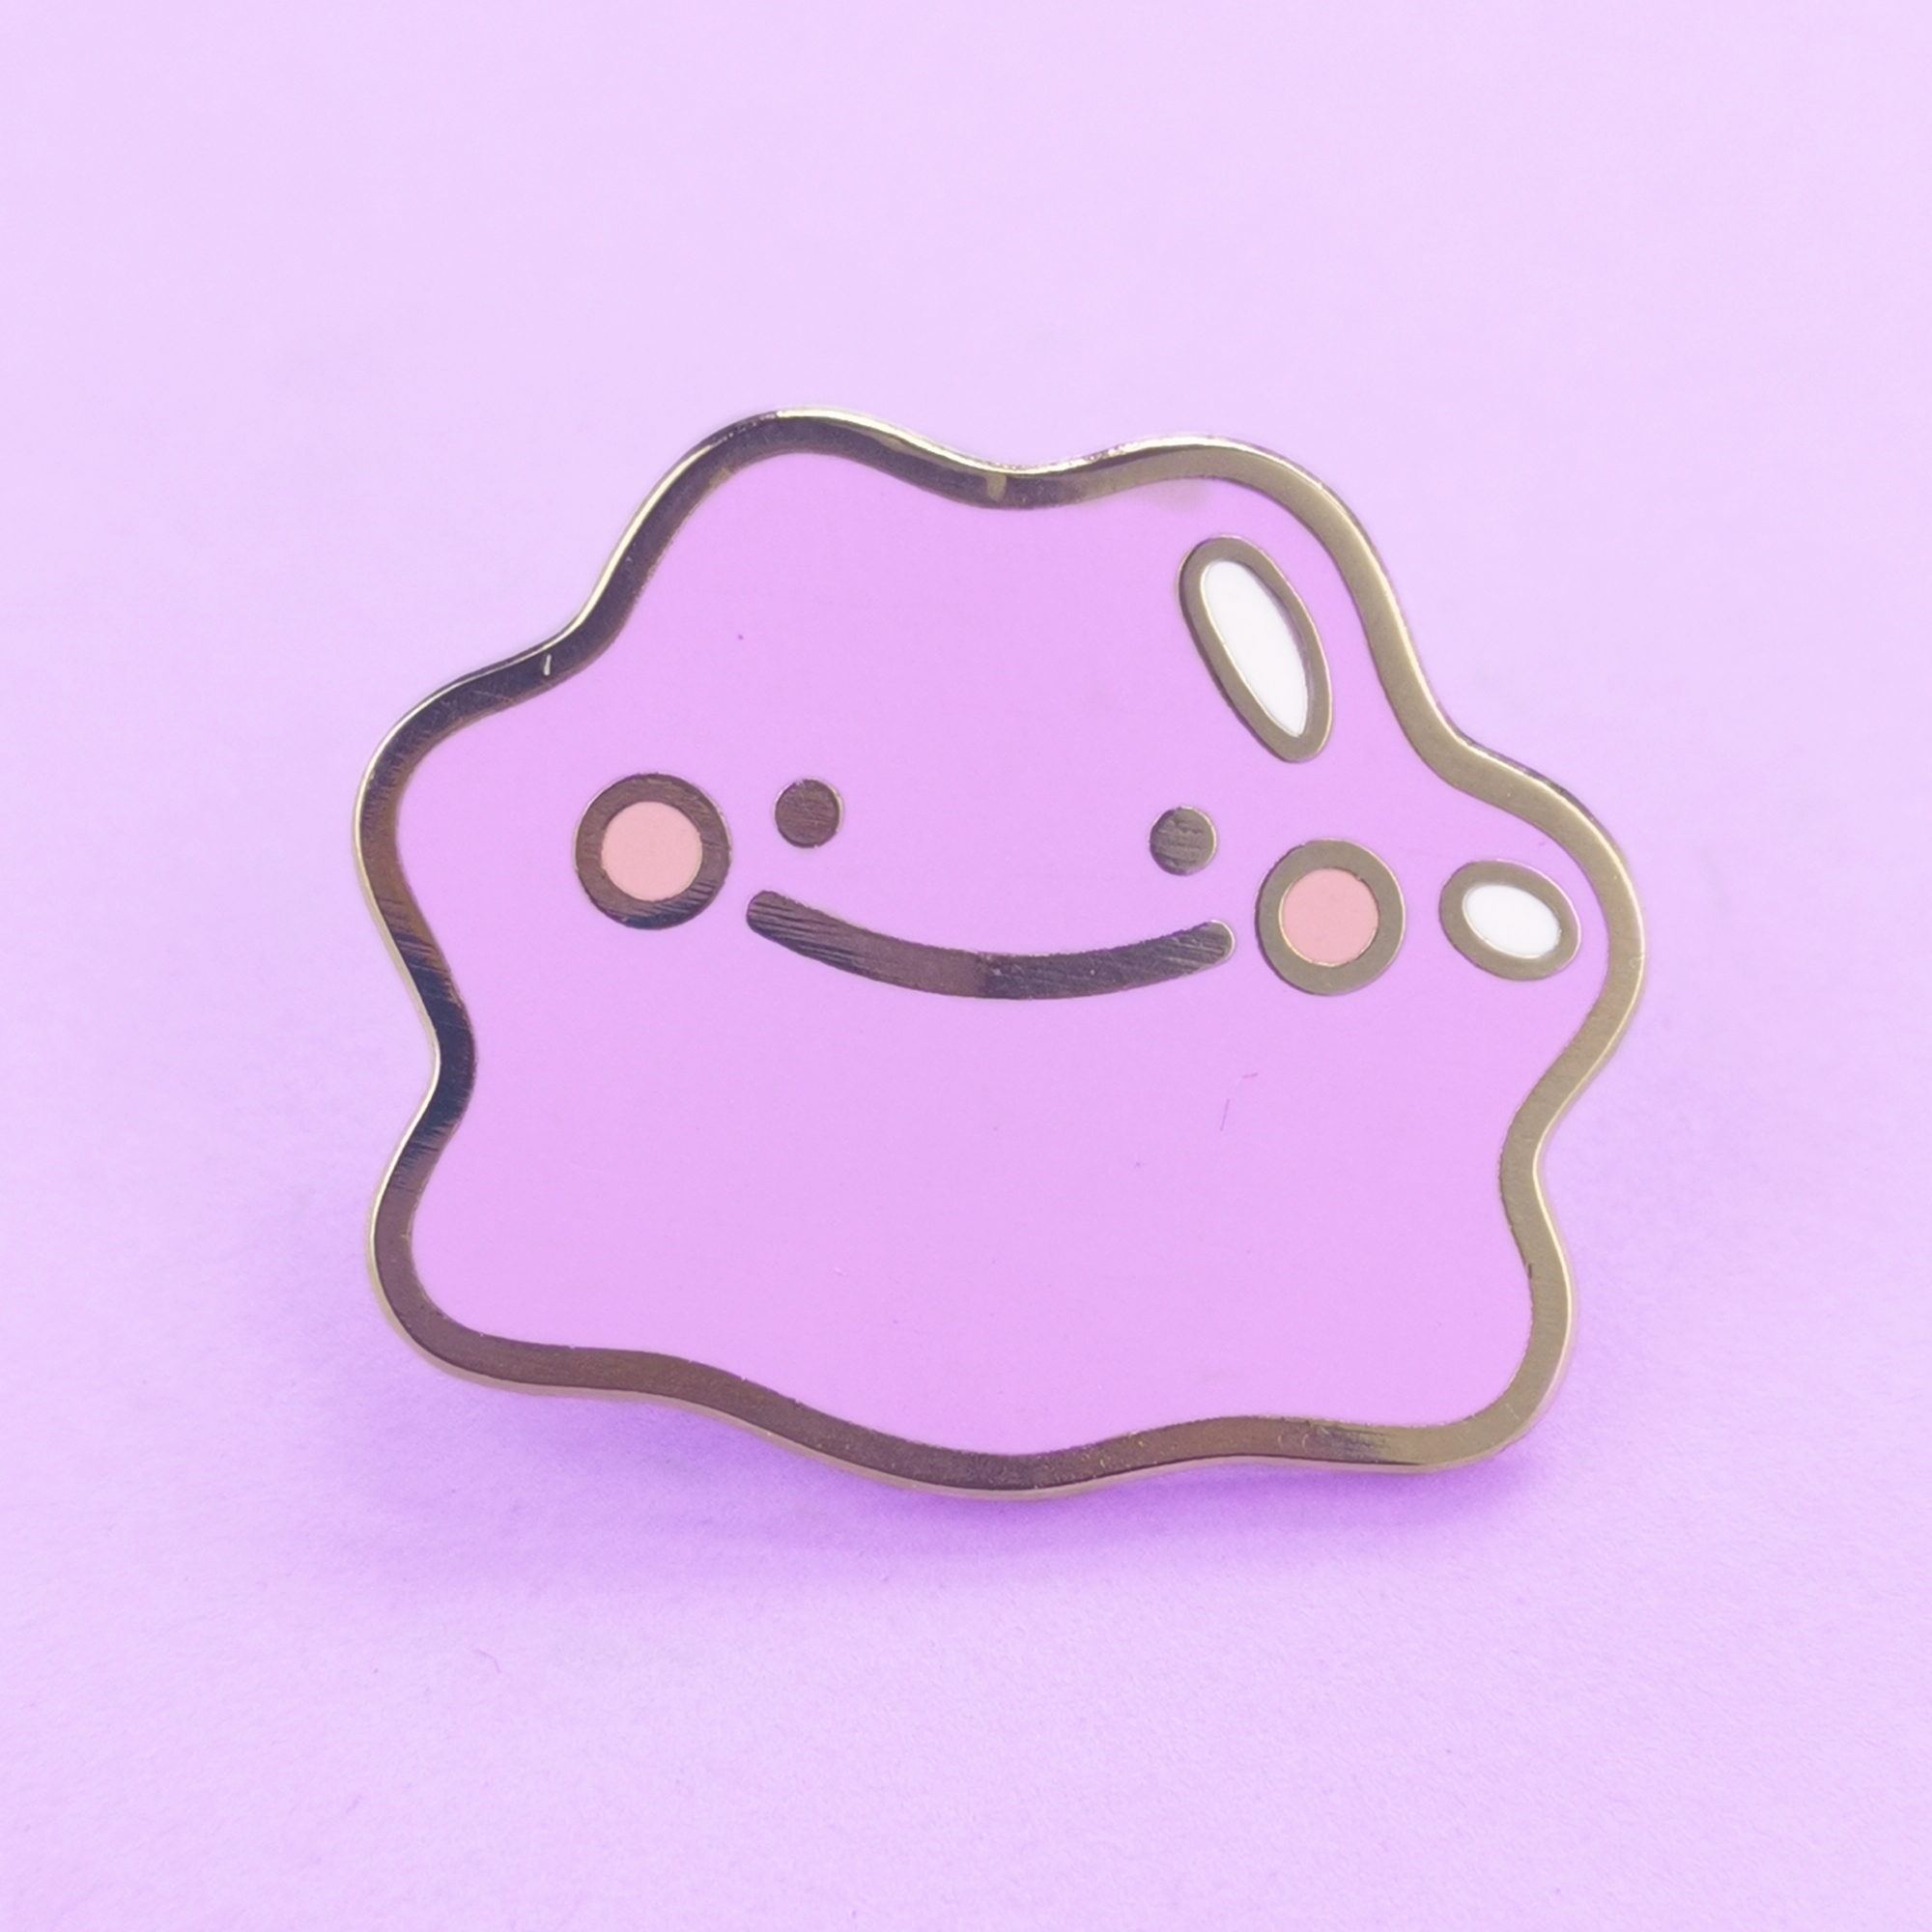 An enamel pin depicting a smiling purple blob that resembles Ditto, a Pokemon character.